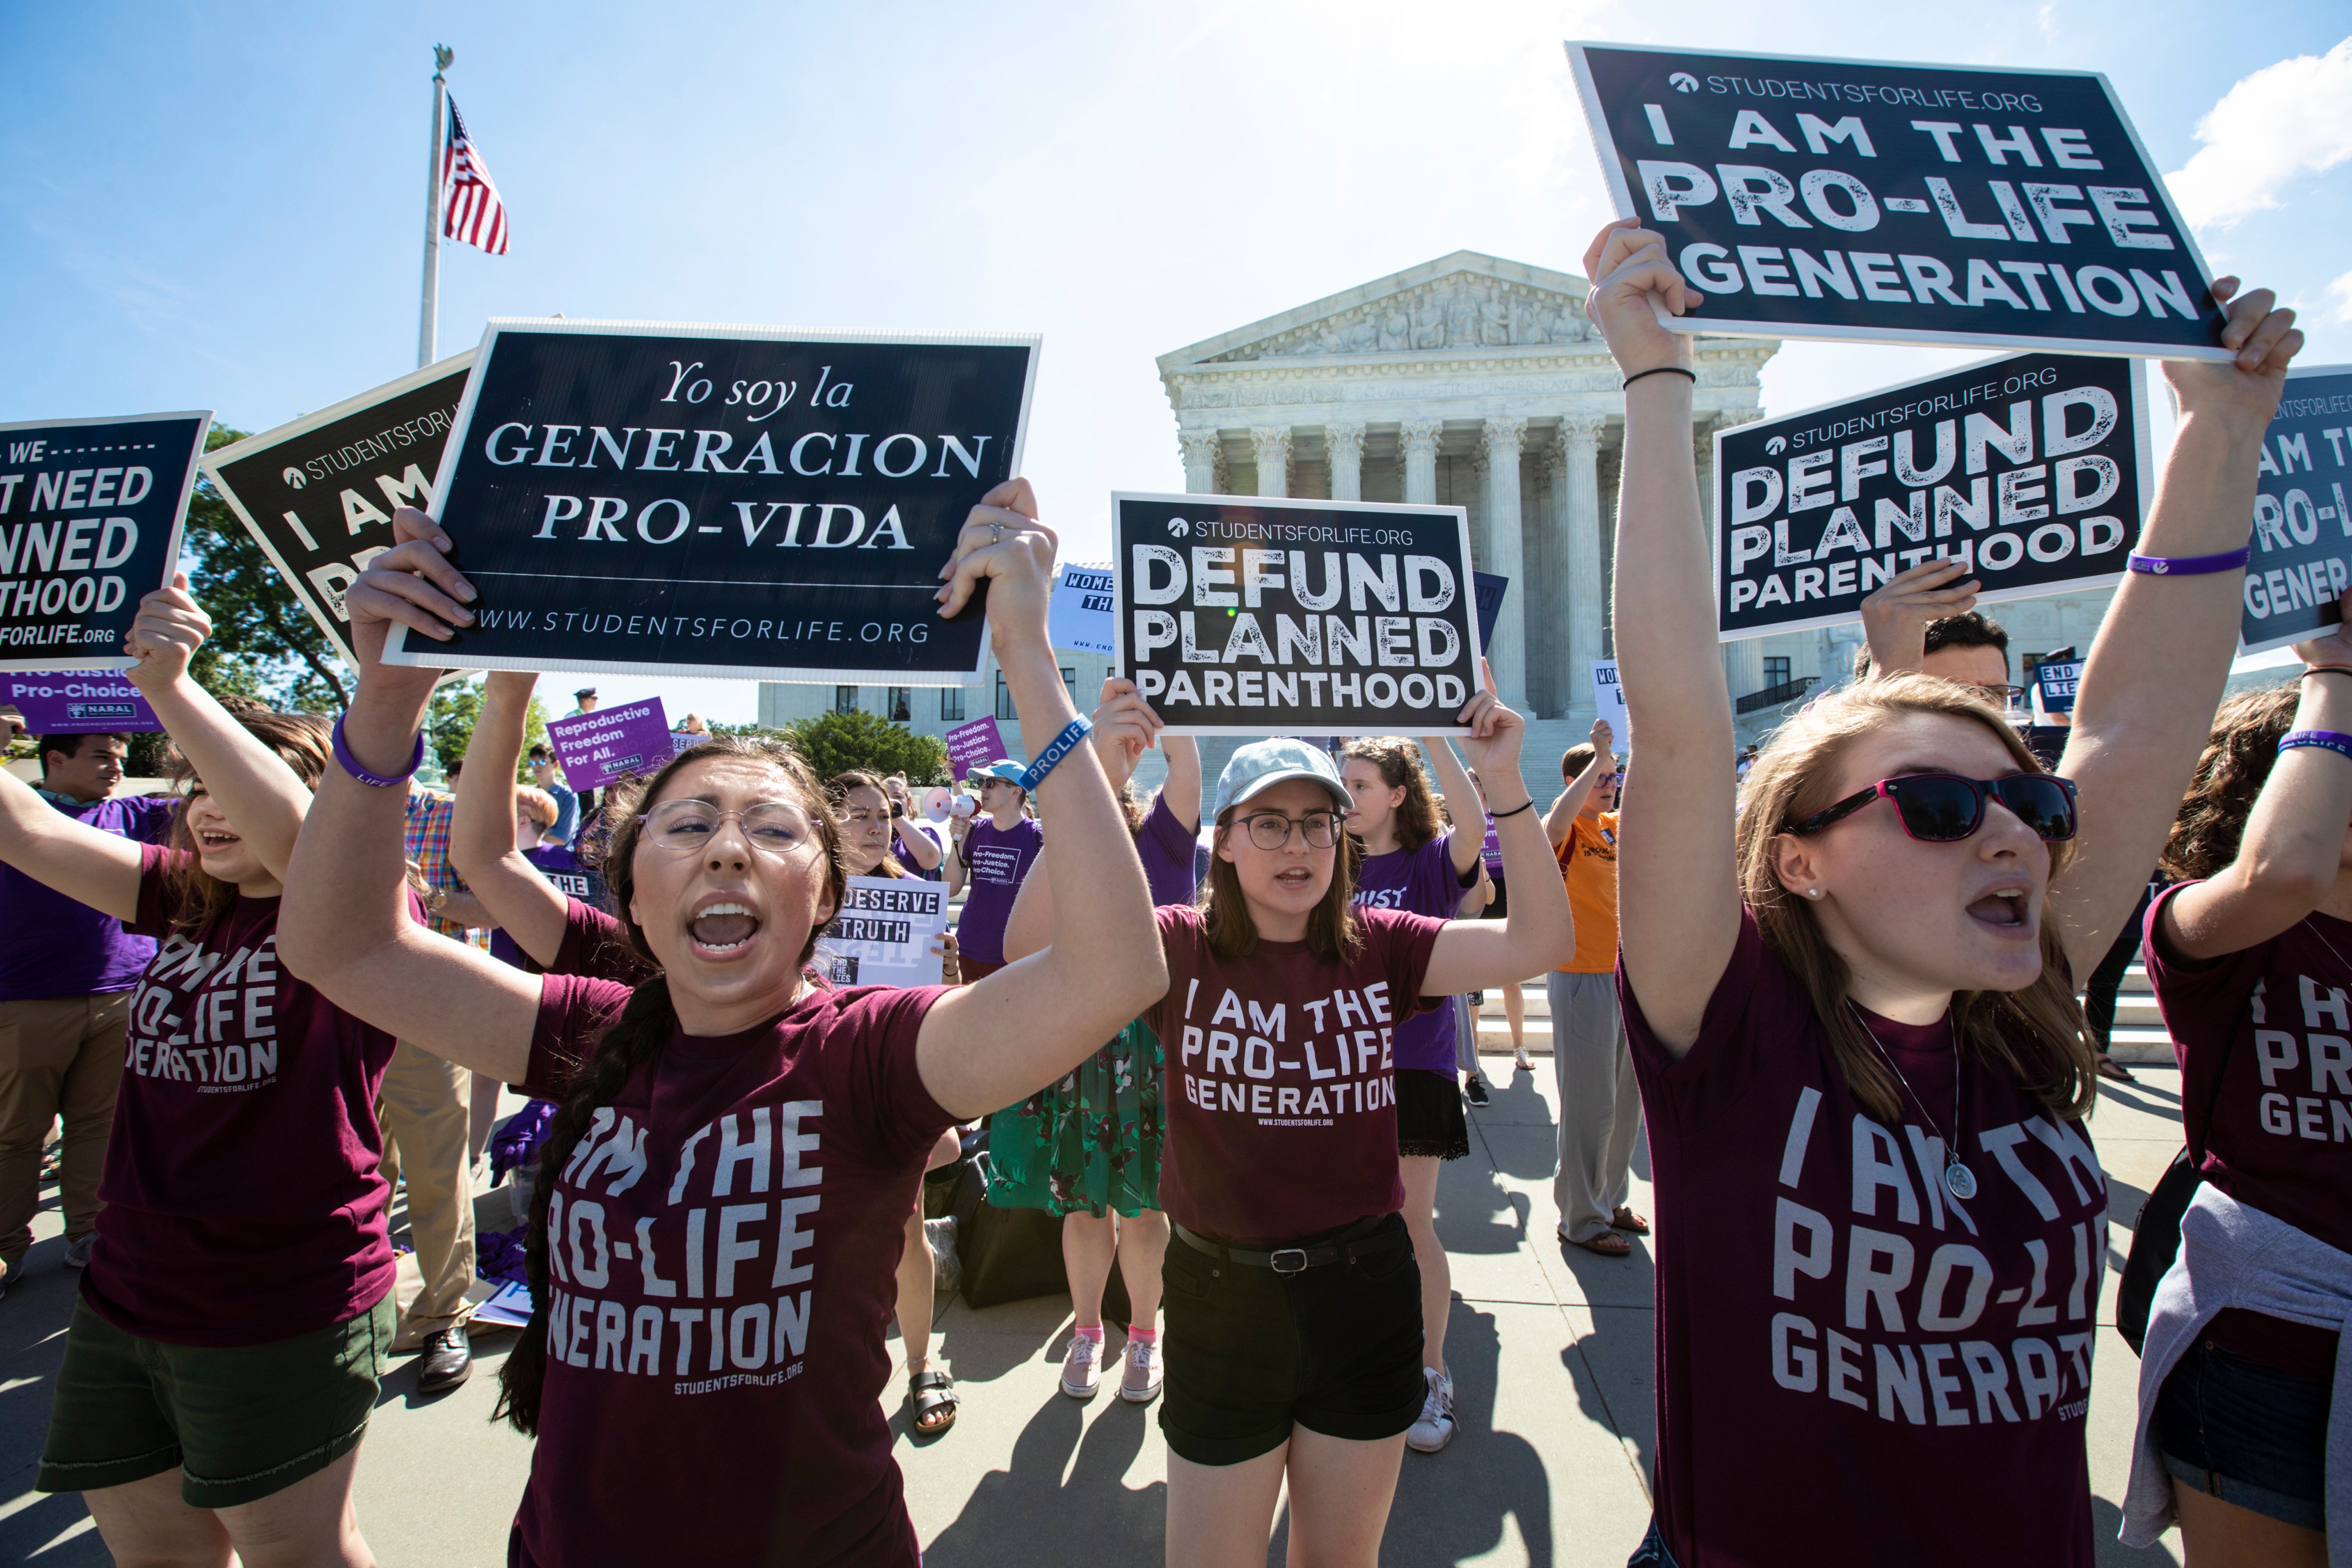 File: Pro-life and anti-abortion advocates demonstrate in front of the Supreme Court in Washington